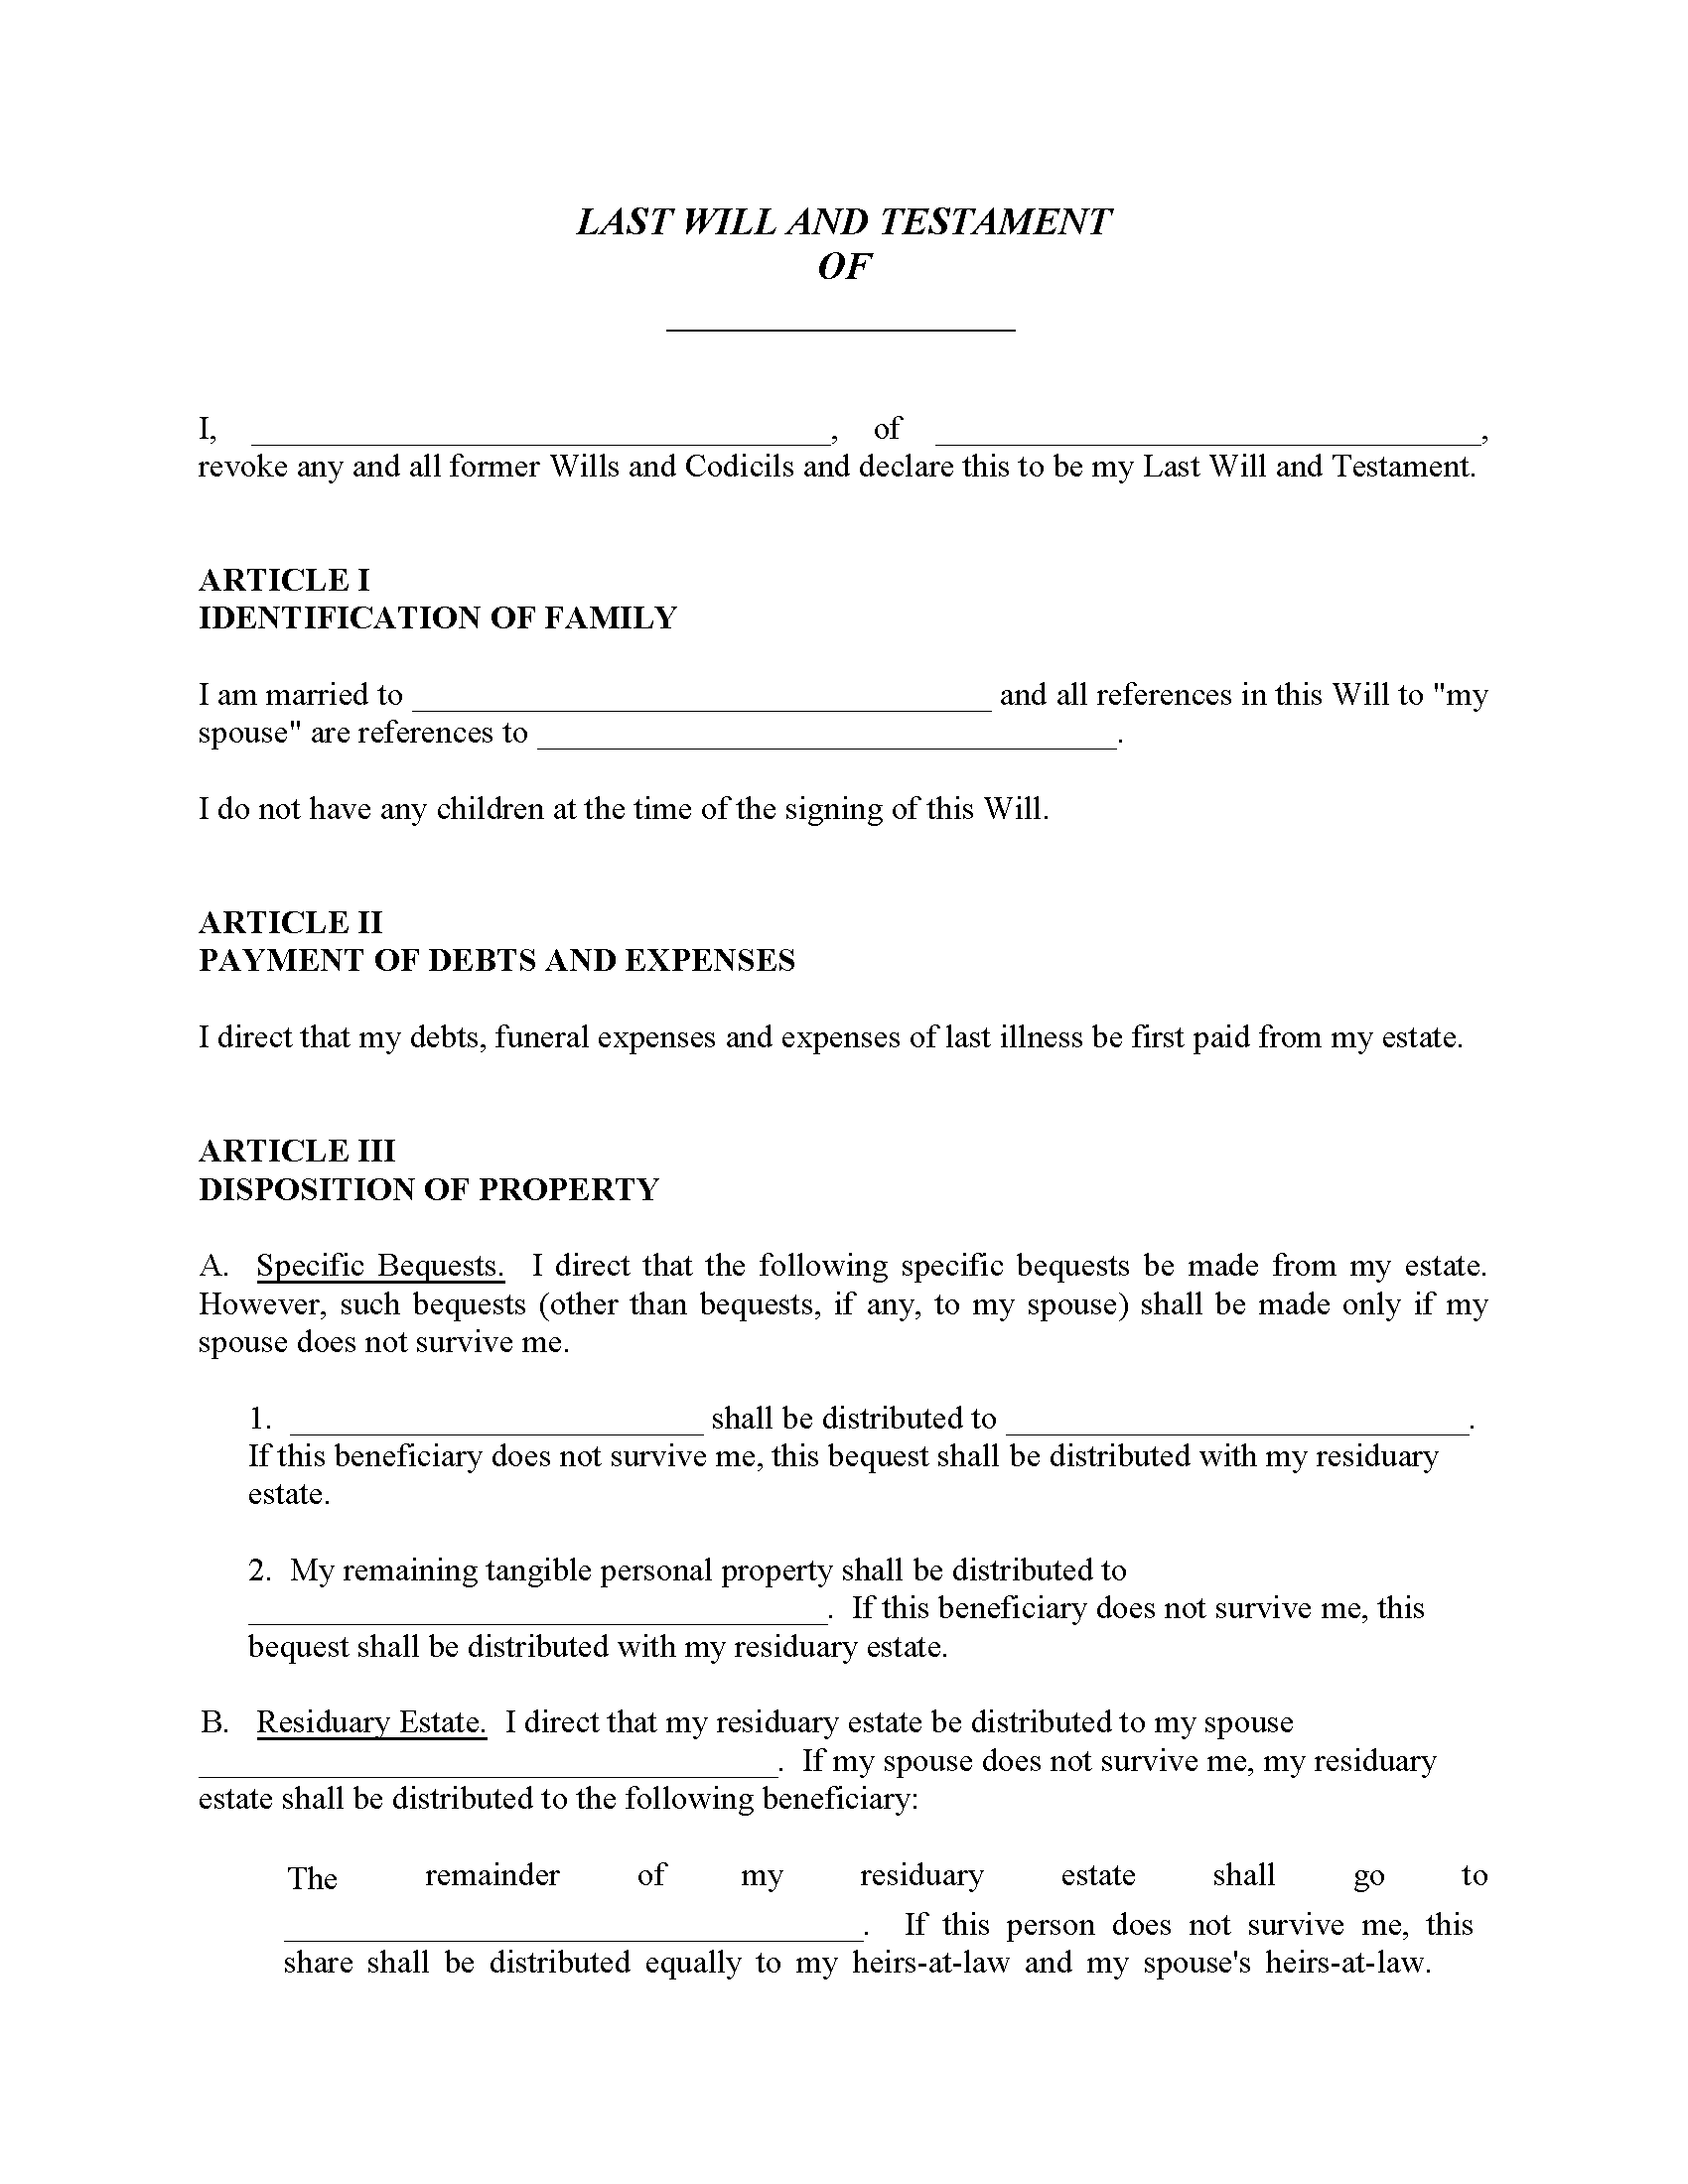 colorado-will-for-married-with-no-children-fillable-pdf-free-printable-legal-forms